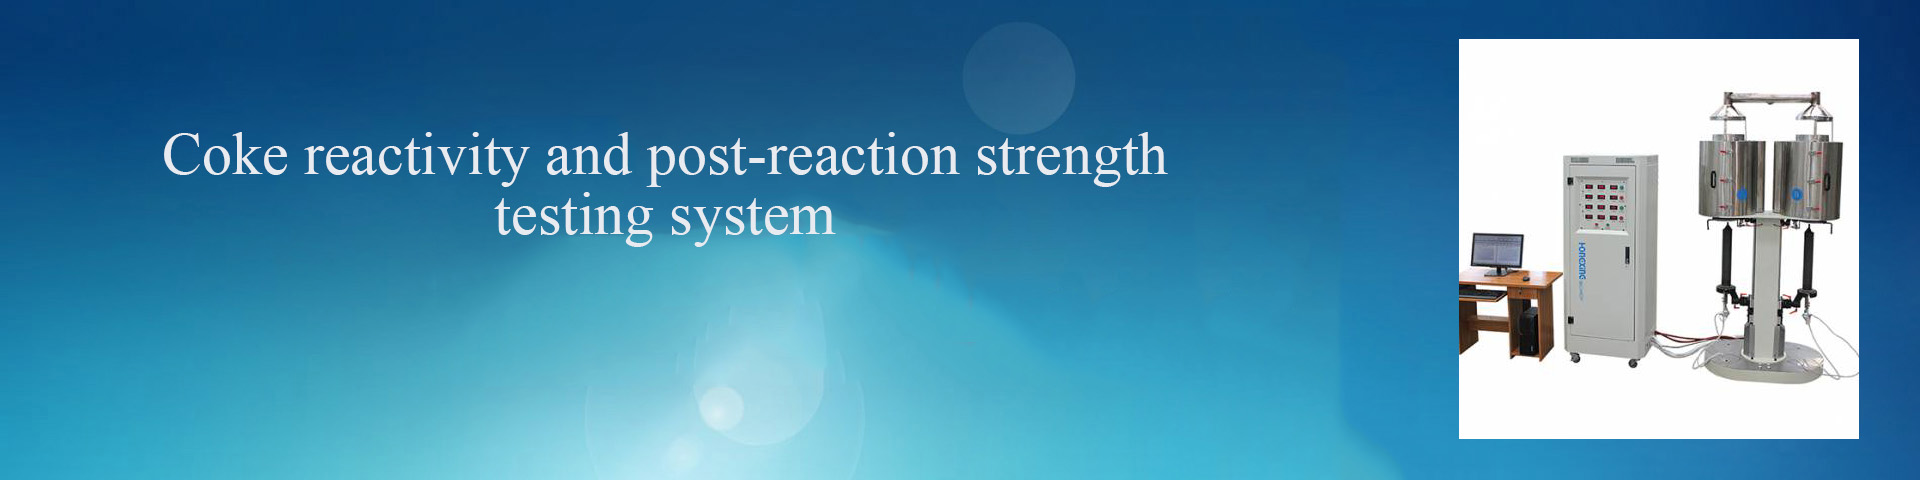 Coke reactivity and post-reaction strength testing system